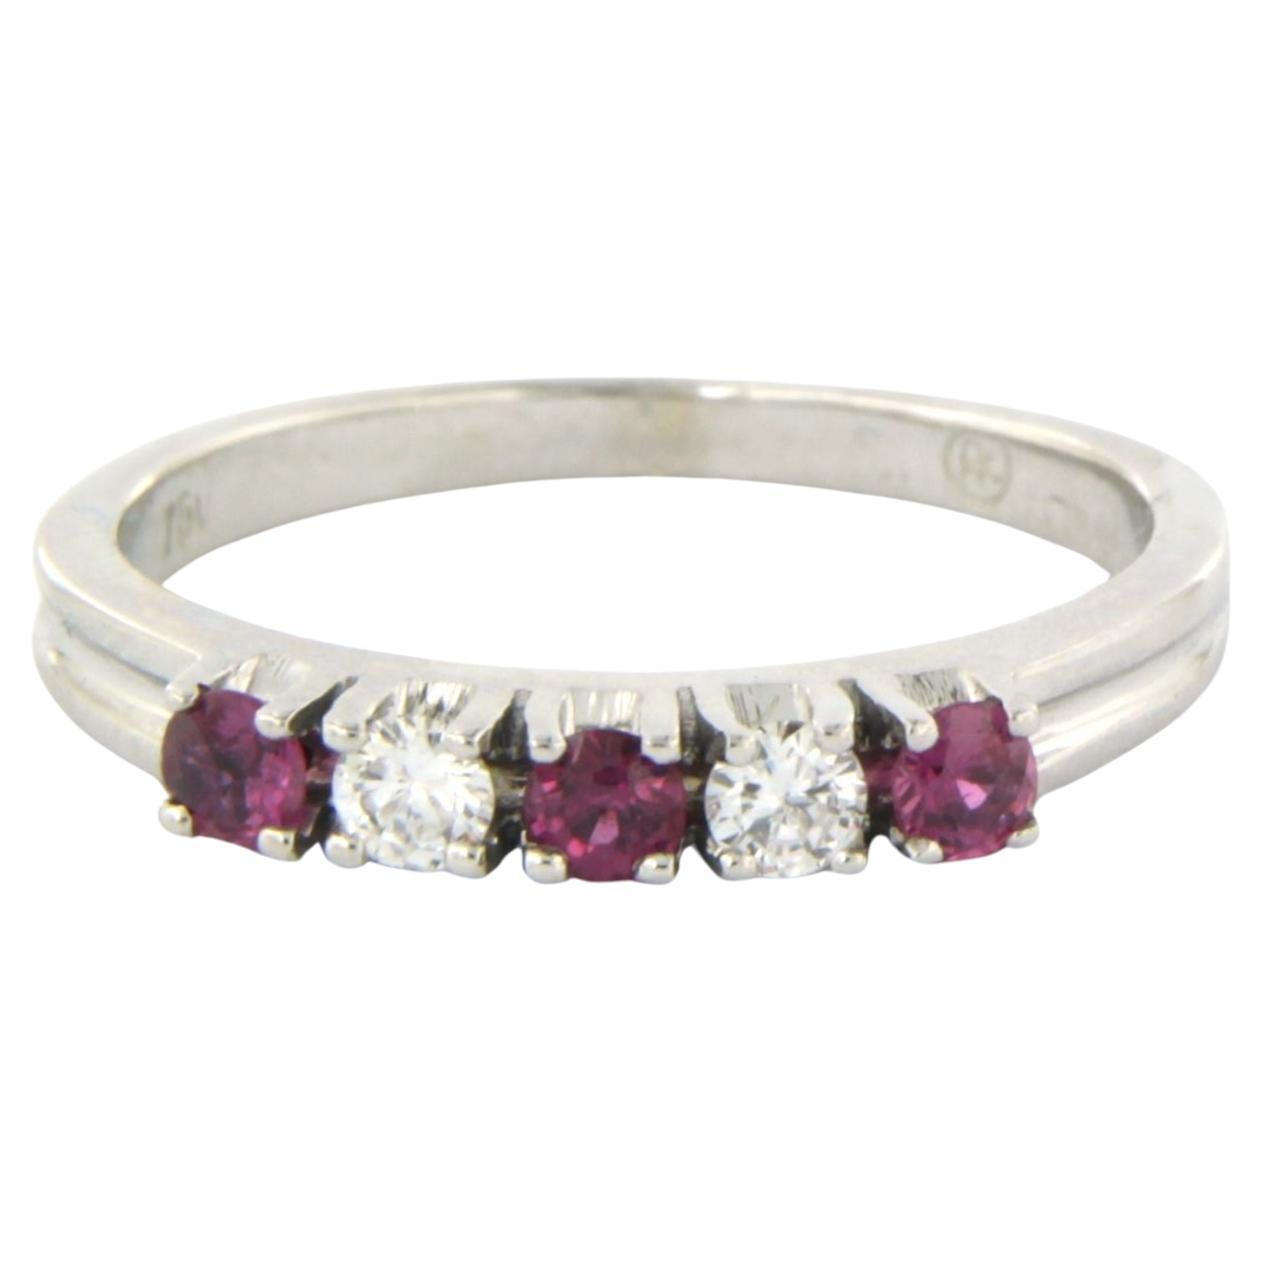 18k white gold ring set with ruby and brilliant cut diamonds up to 0.15ct